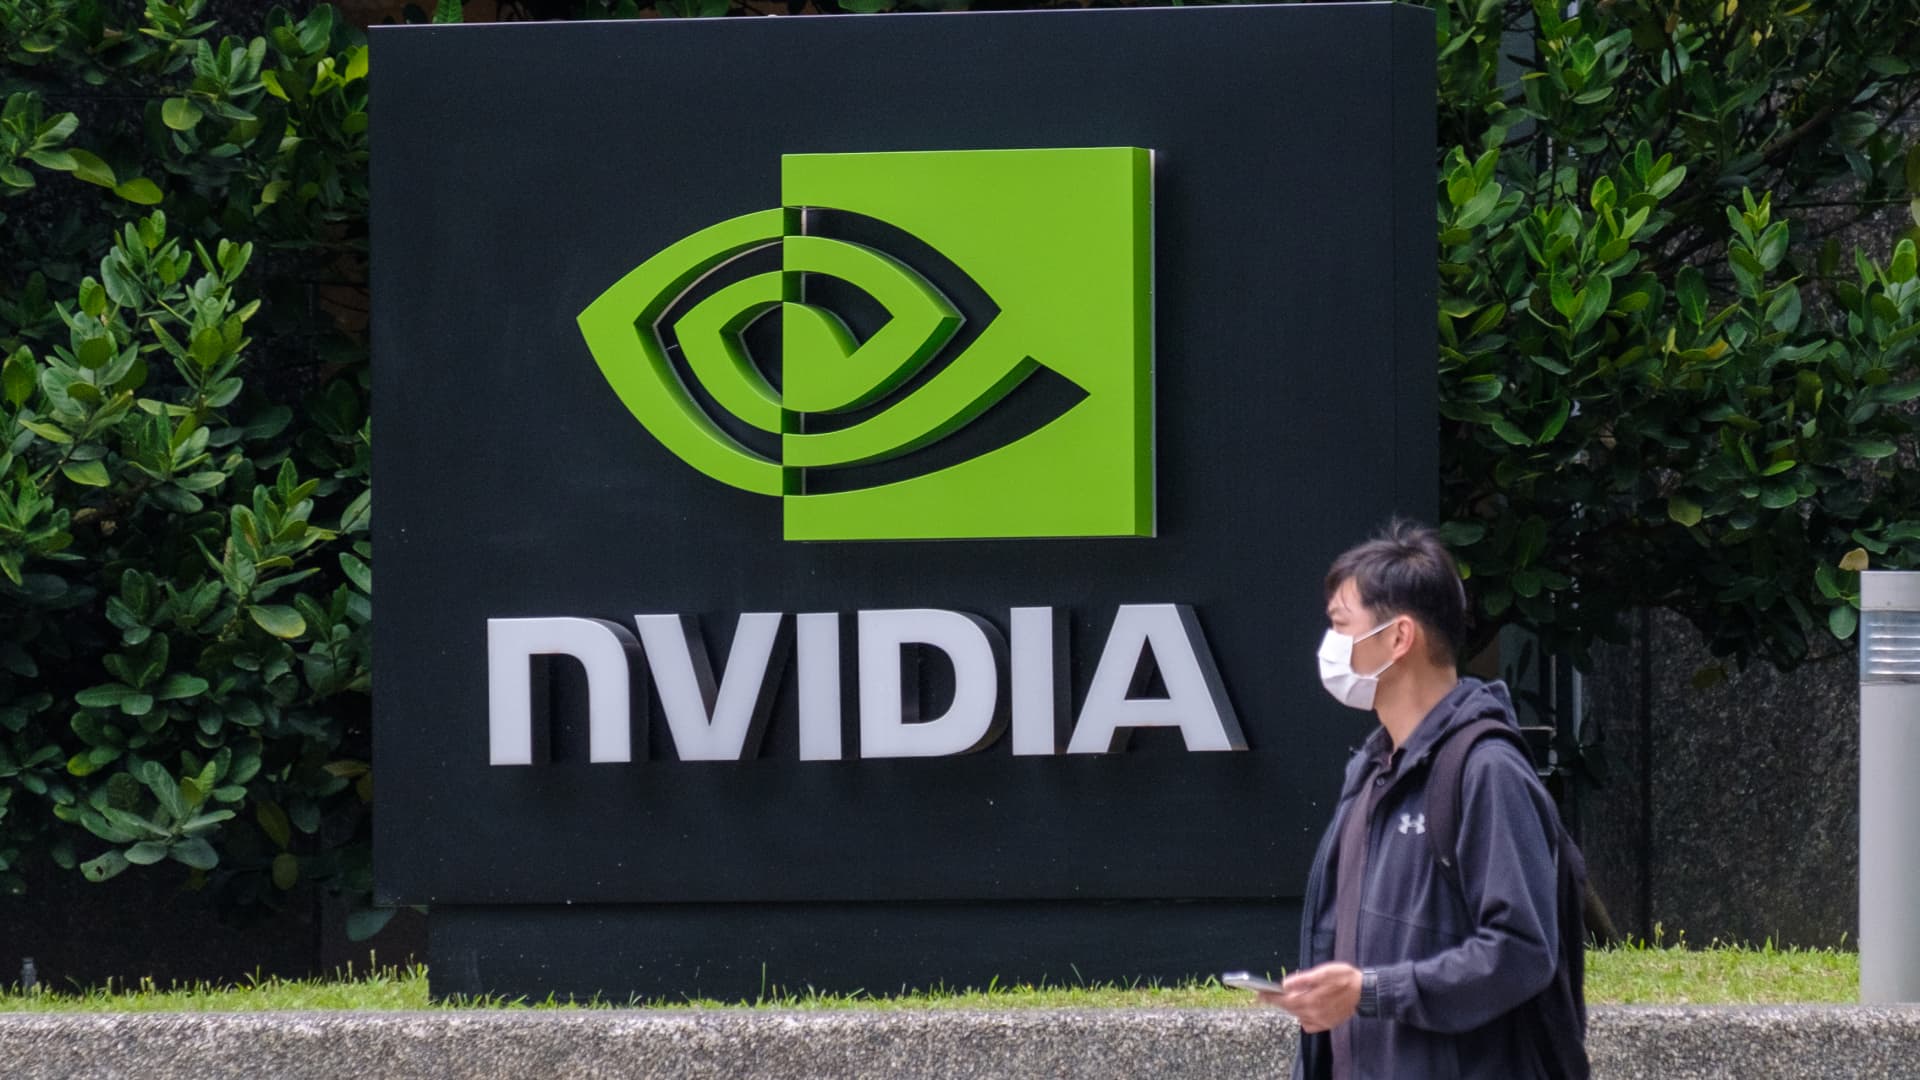 Cramer: Nvidia still likely to outperform other U.S. chipmakers despite China woes